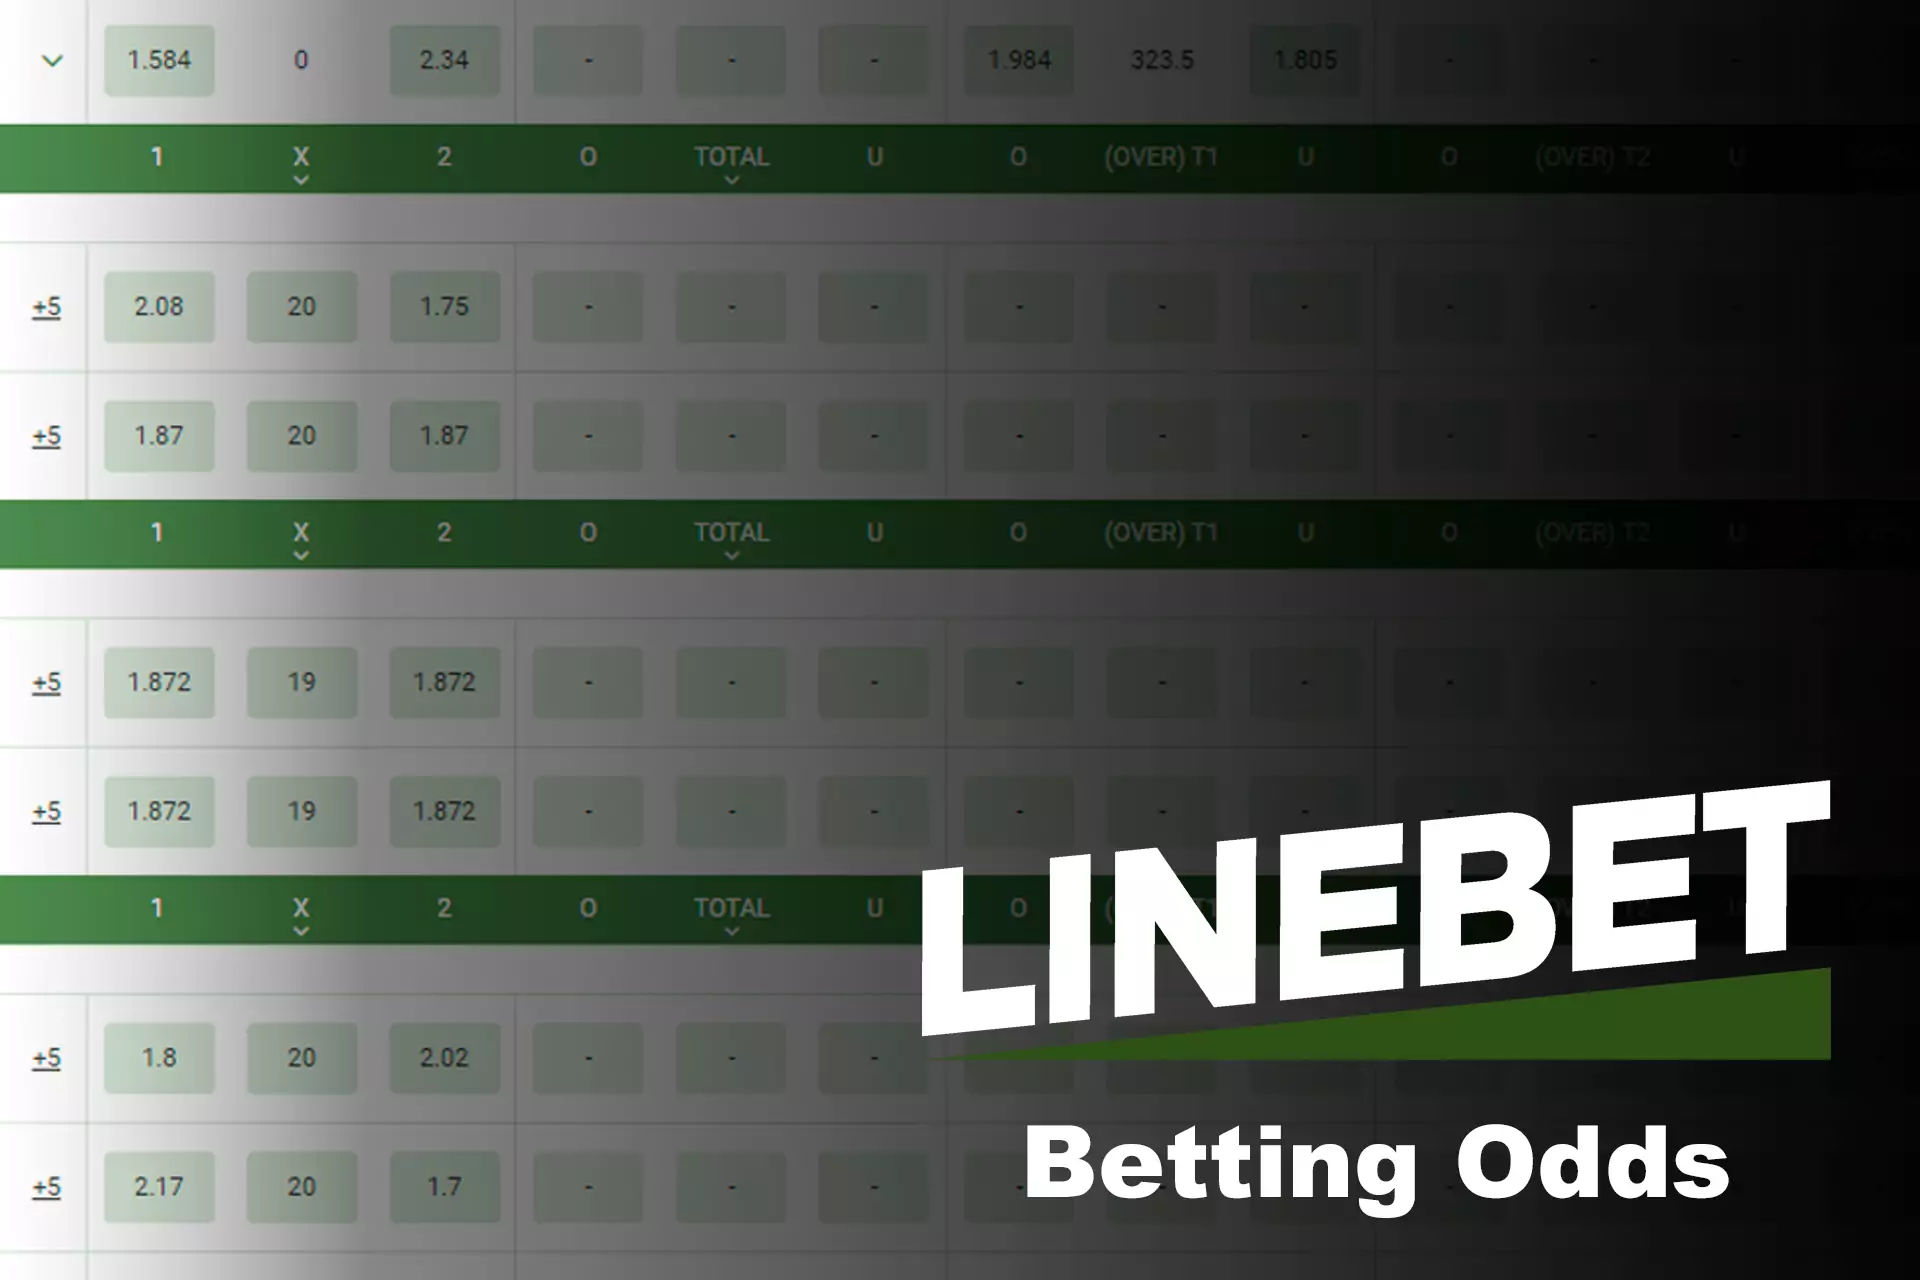 Linebet has incredible odds on sports events betting.